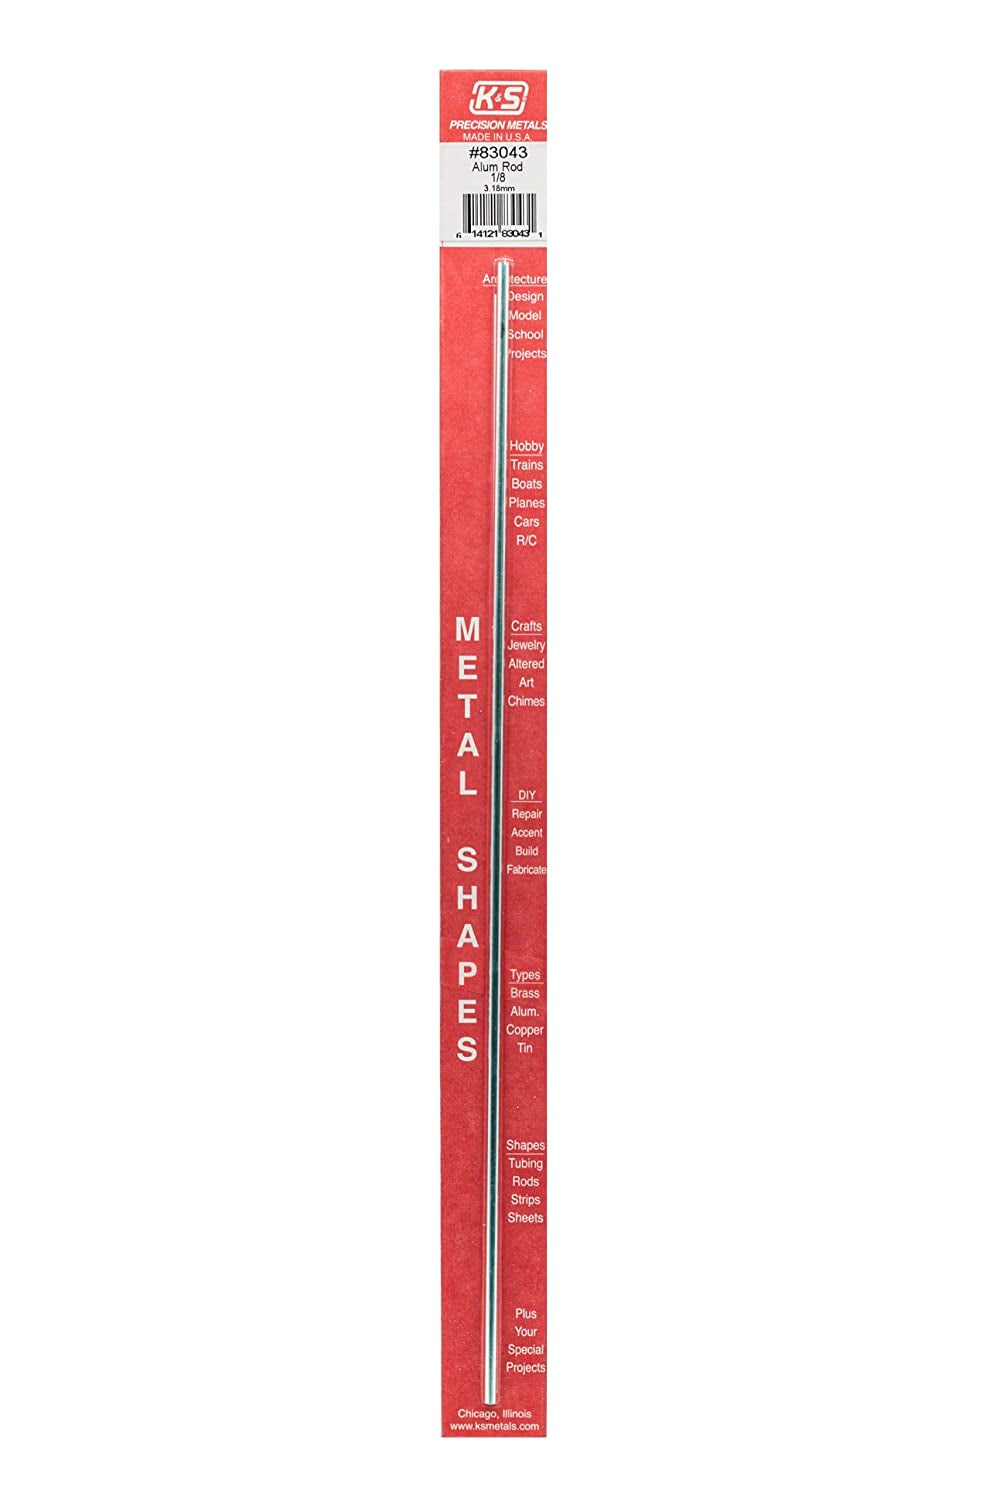 K & S 83042 round Aluminum Rod, 3/32" OD X 12" Long, 1 Piece, Made in the USA